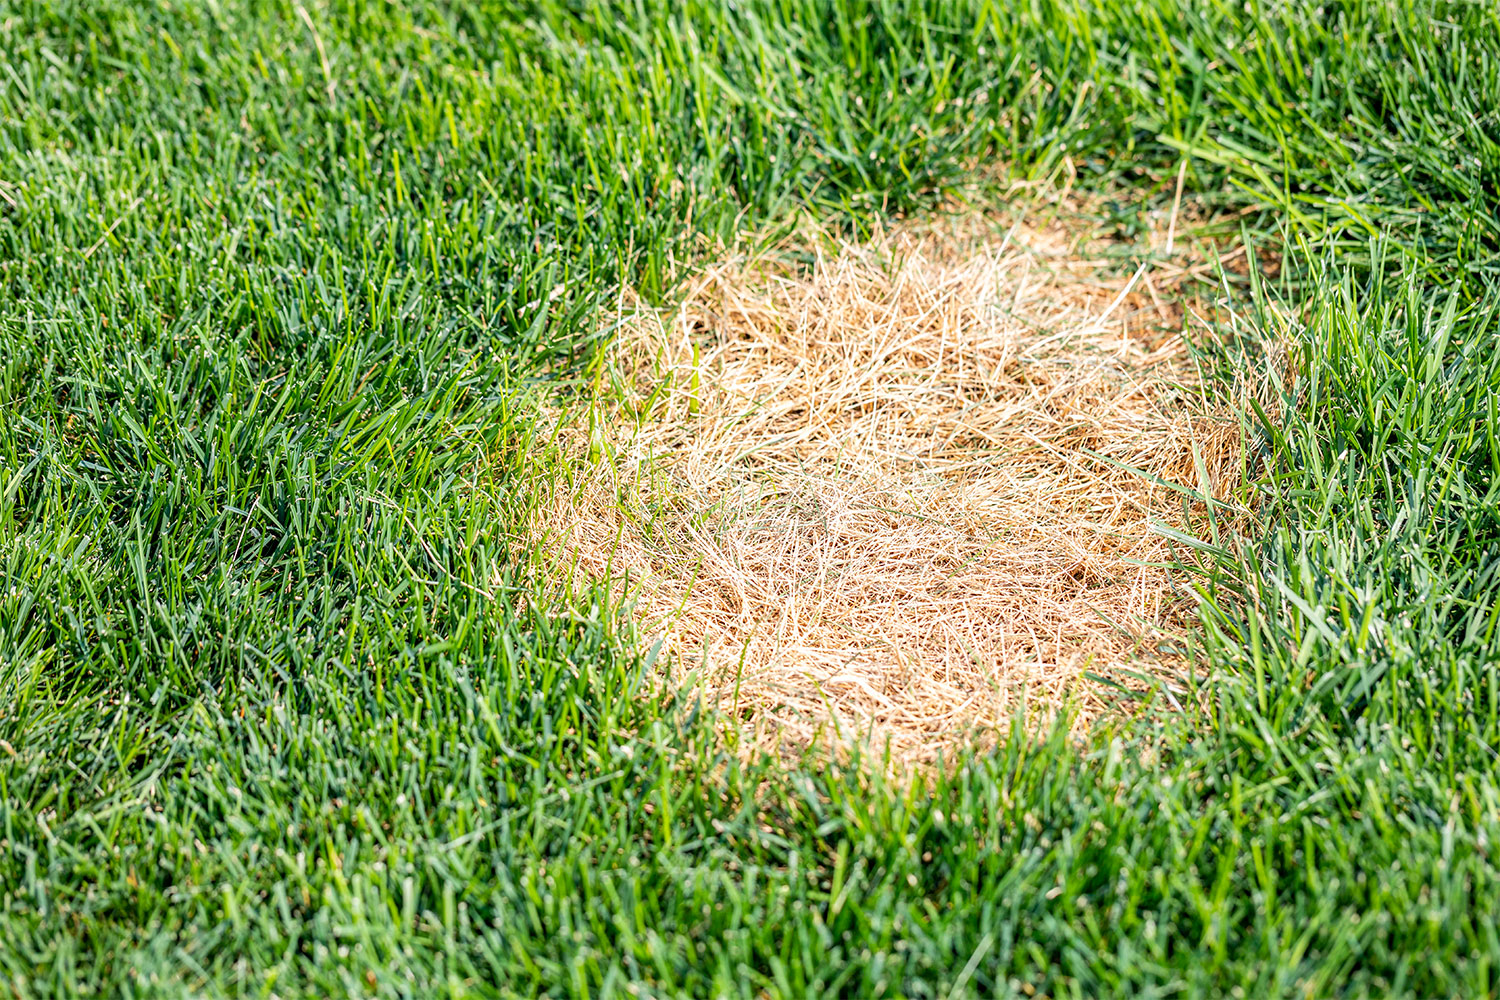  How to fix yellow spots in grass so your yard is the pride of the neighborhood once more